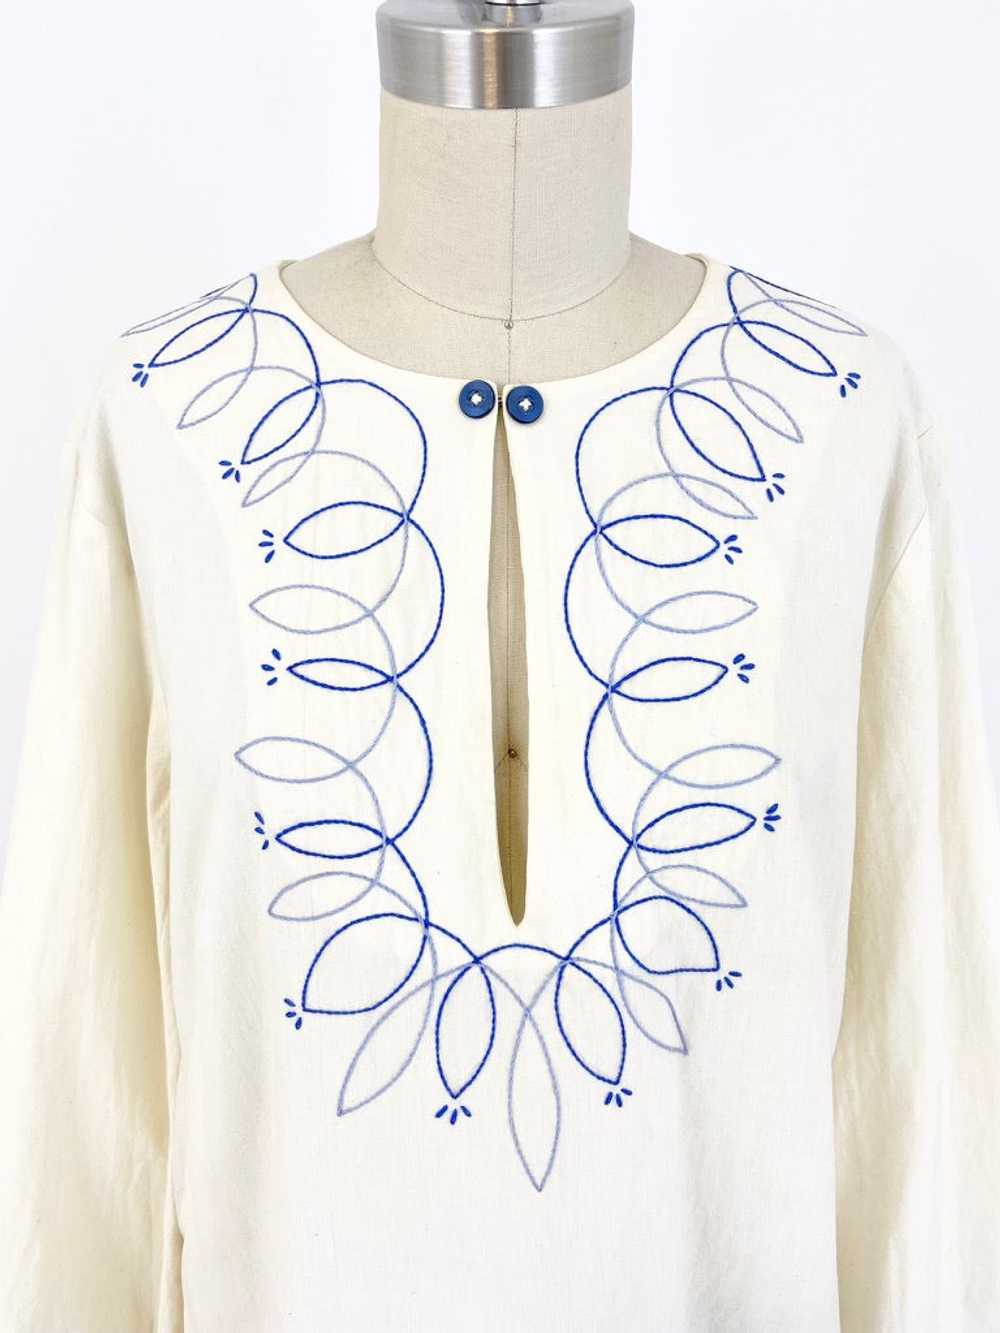 70s Embroidered Top - image 2